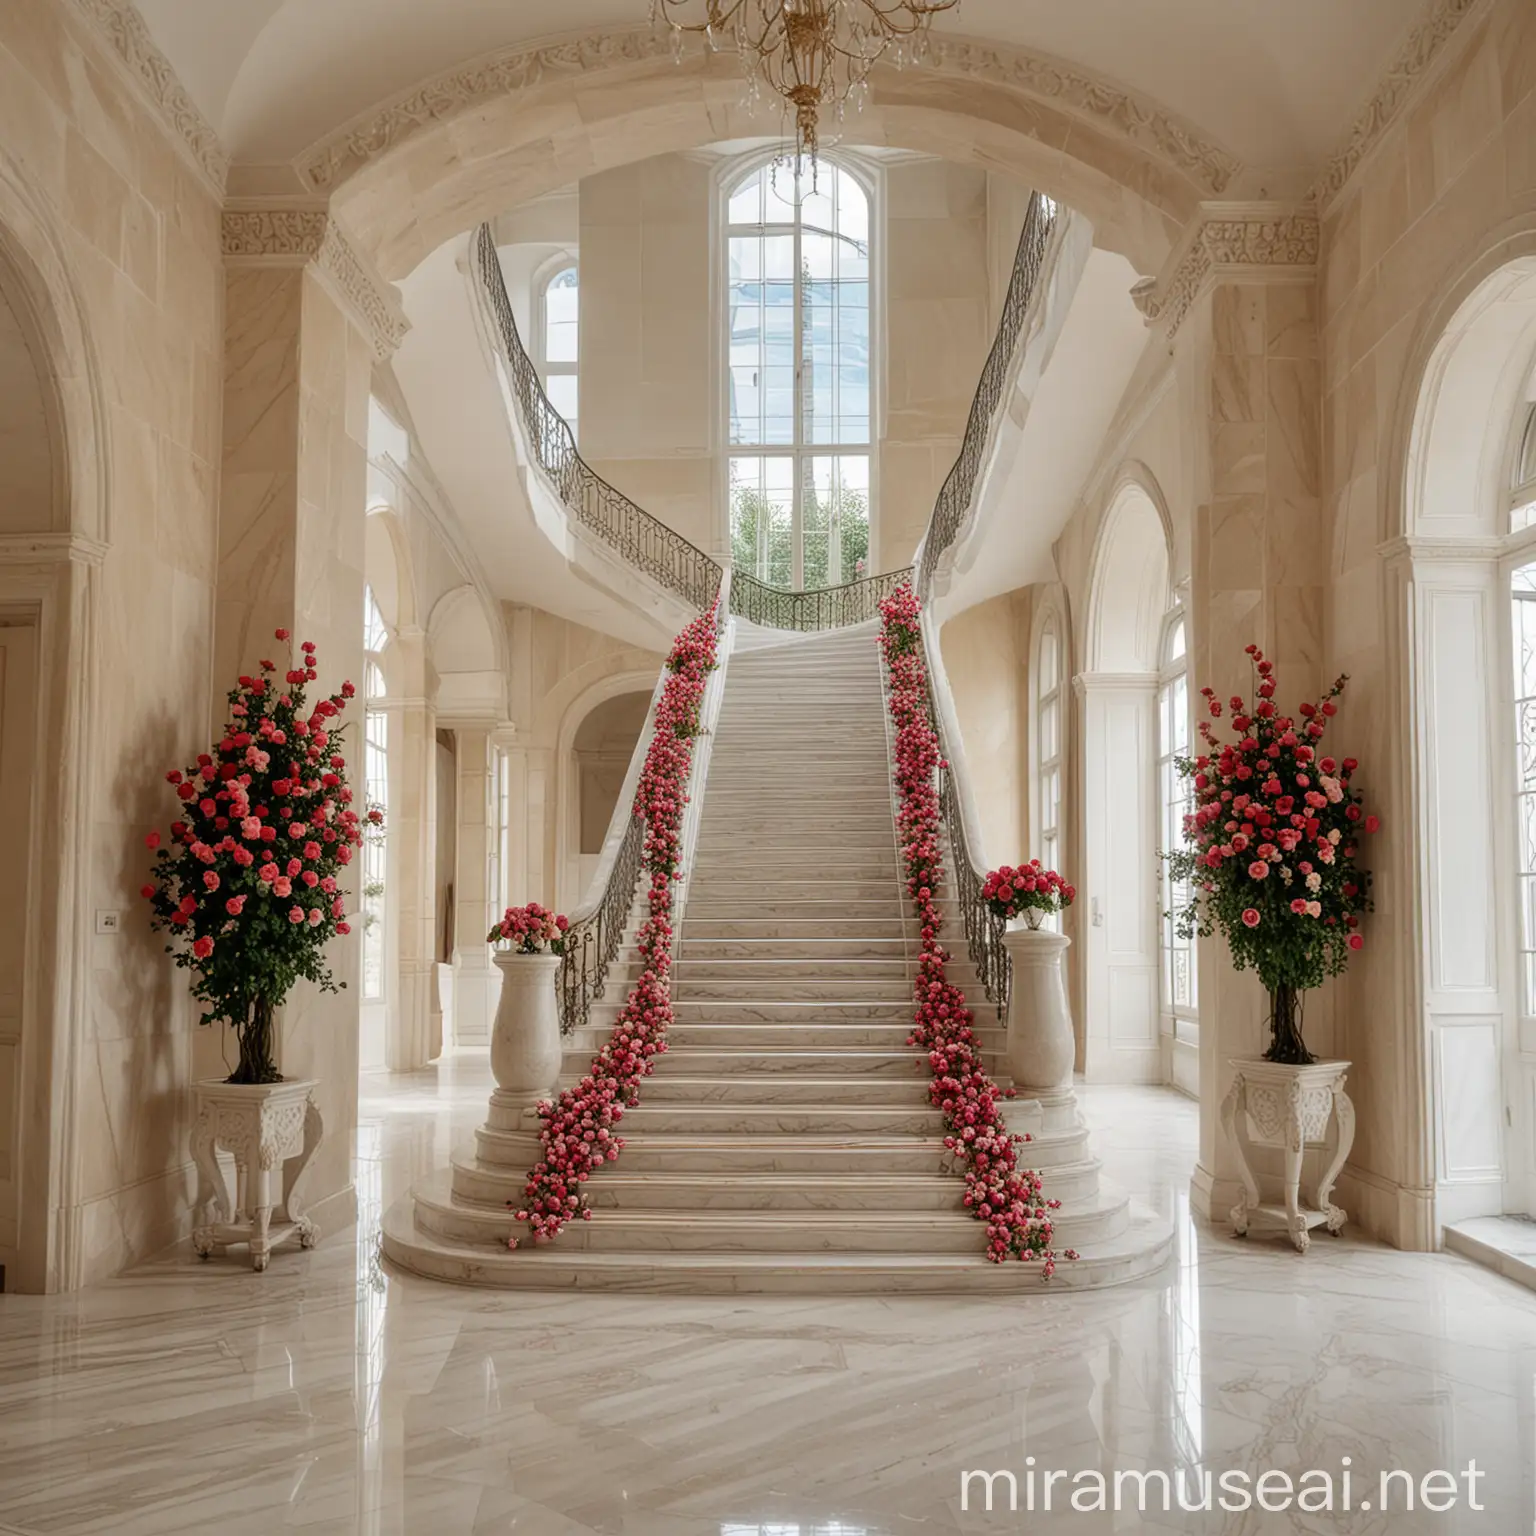 Elegant Marble Staircase with Grand Corridor and Rose Vine Accents